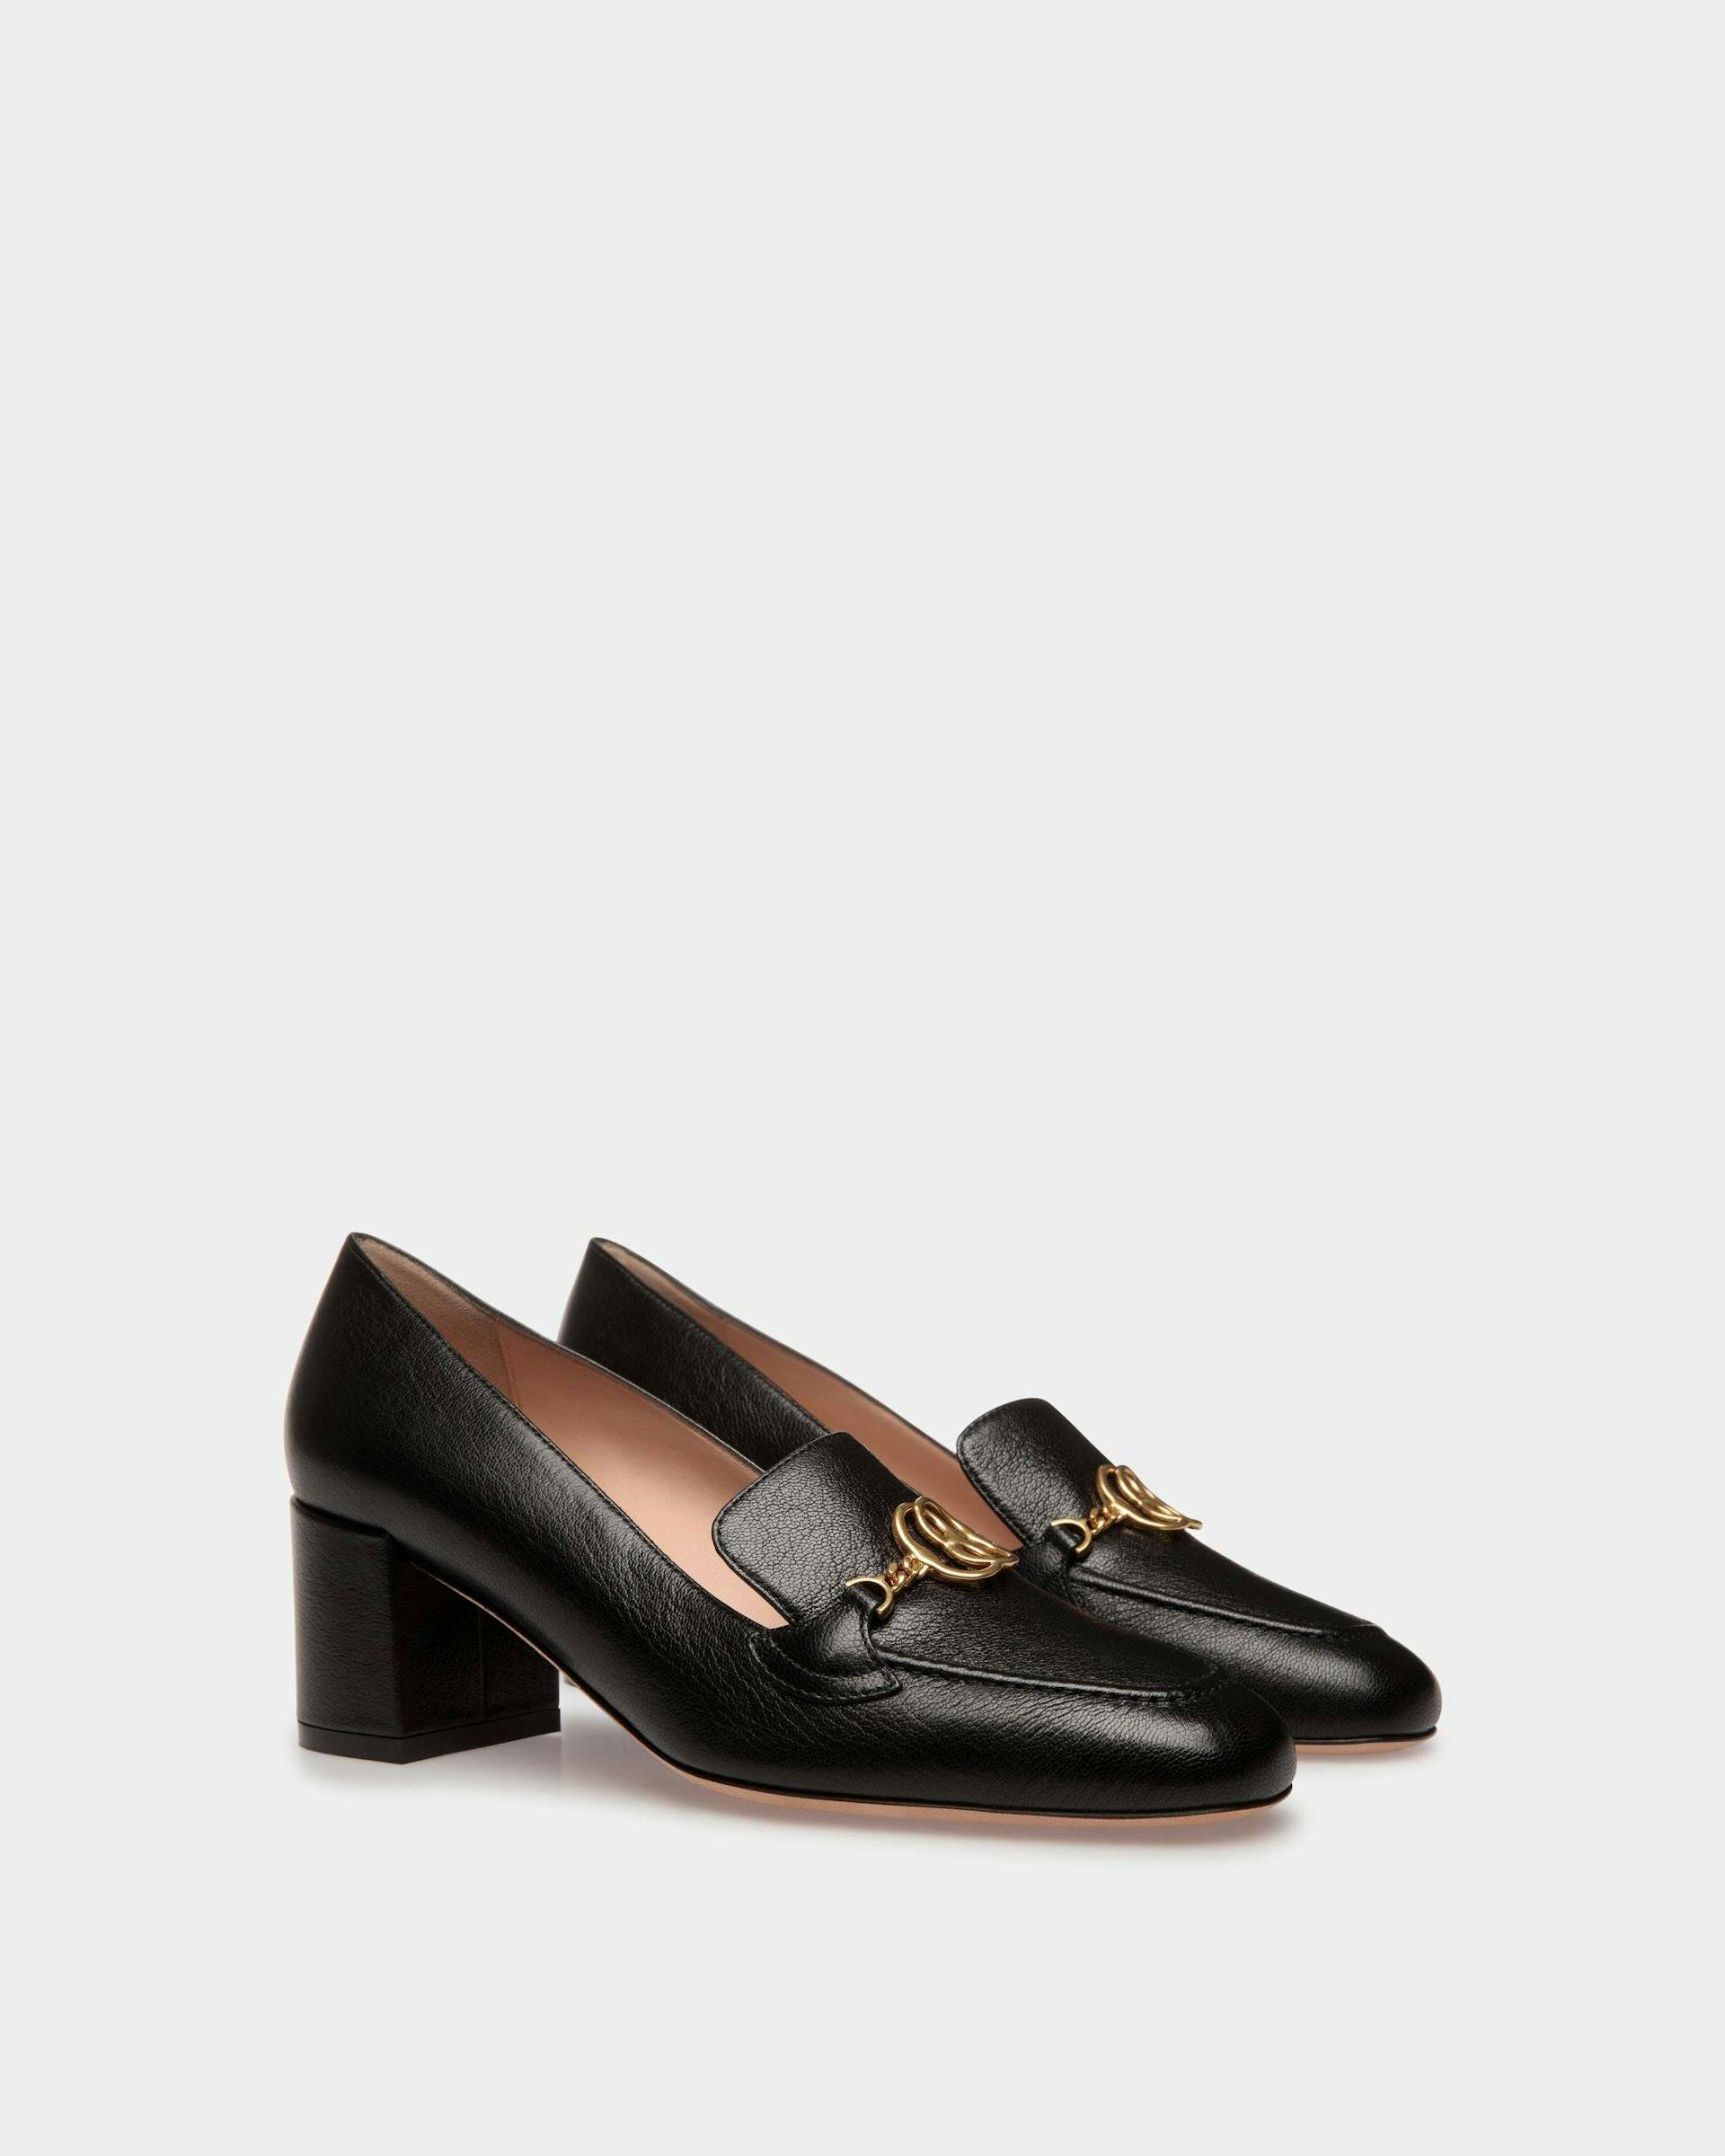 Women's Emblem Pumps In Black Leather | Bally | Still Life 3/4 Front